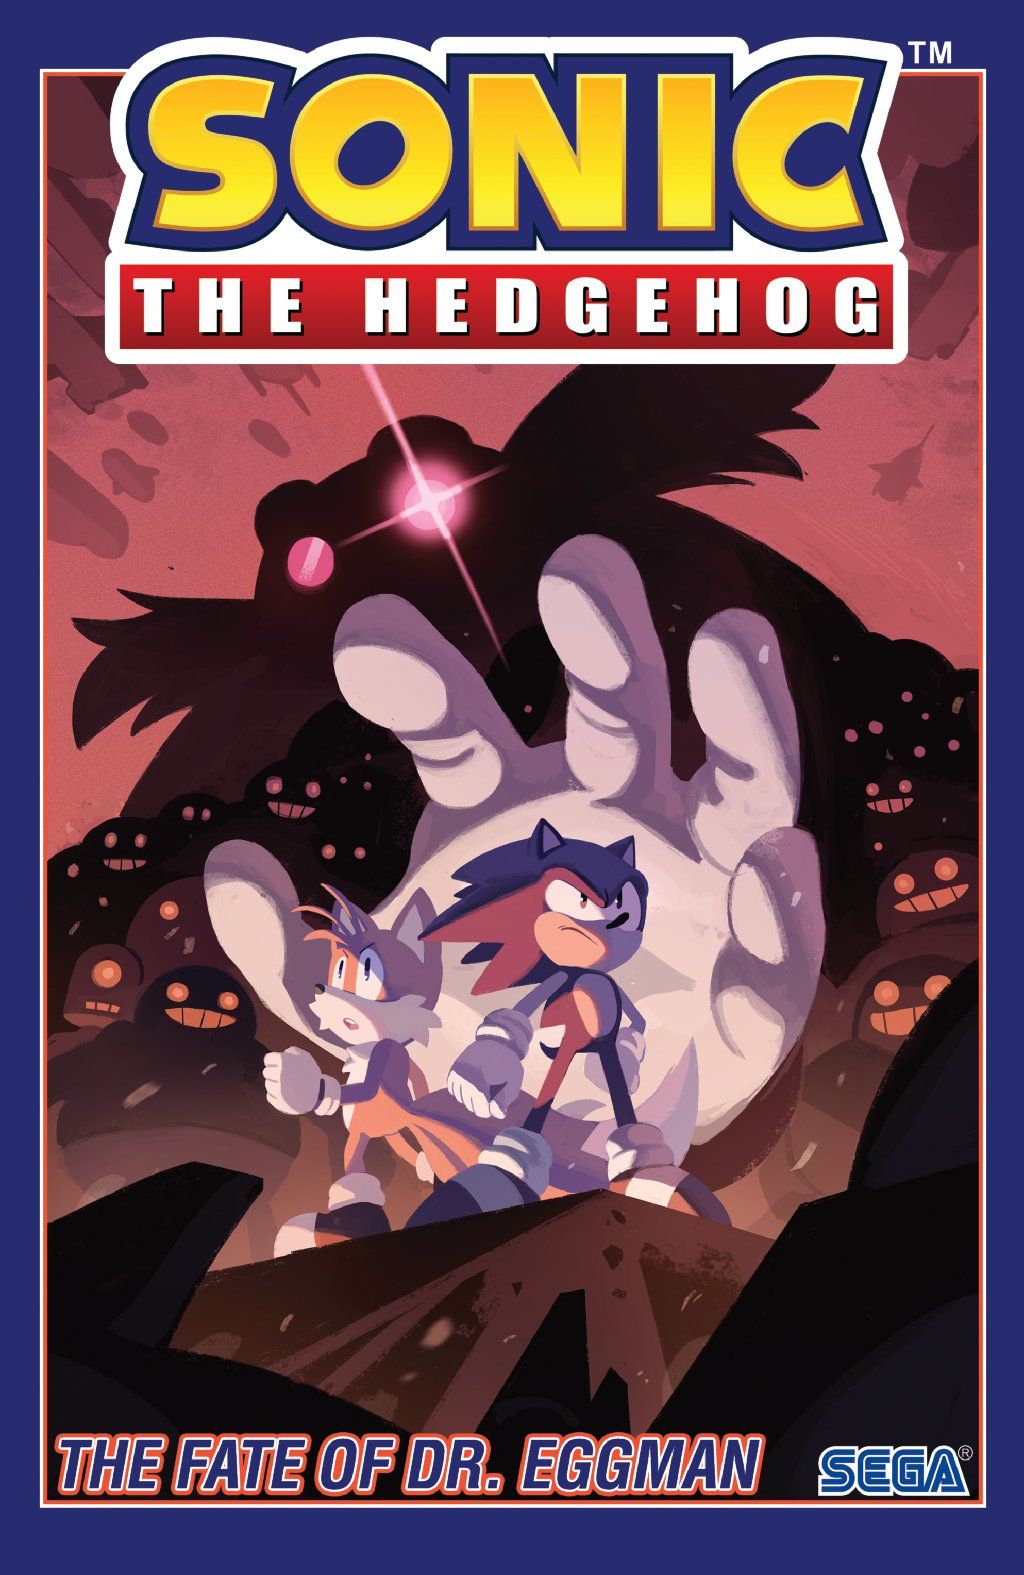 Sonic the Hedgehog Volume 2: The Fate of Dr. Eggman